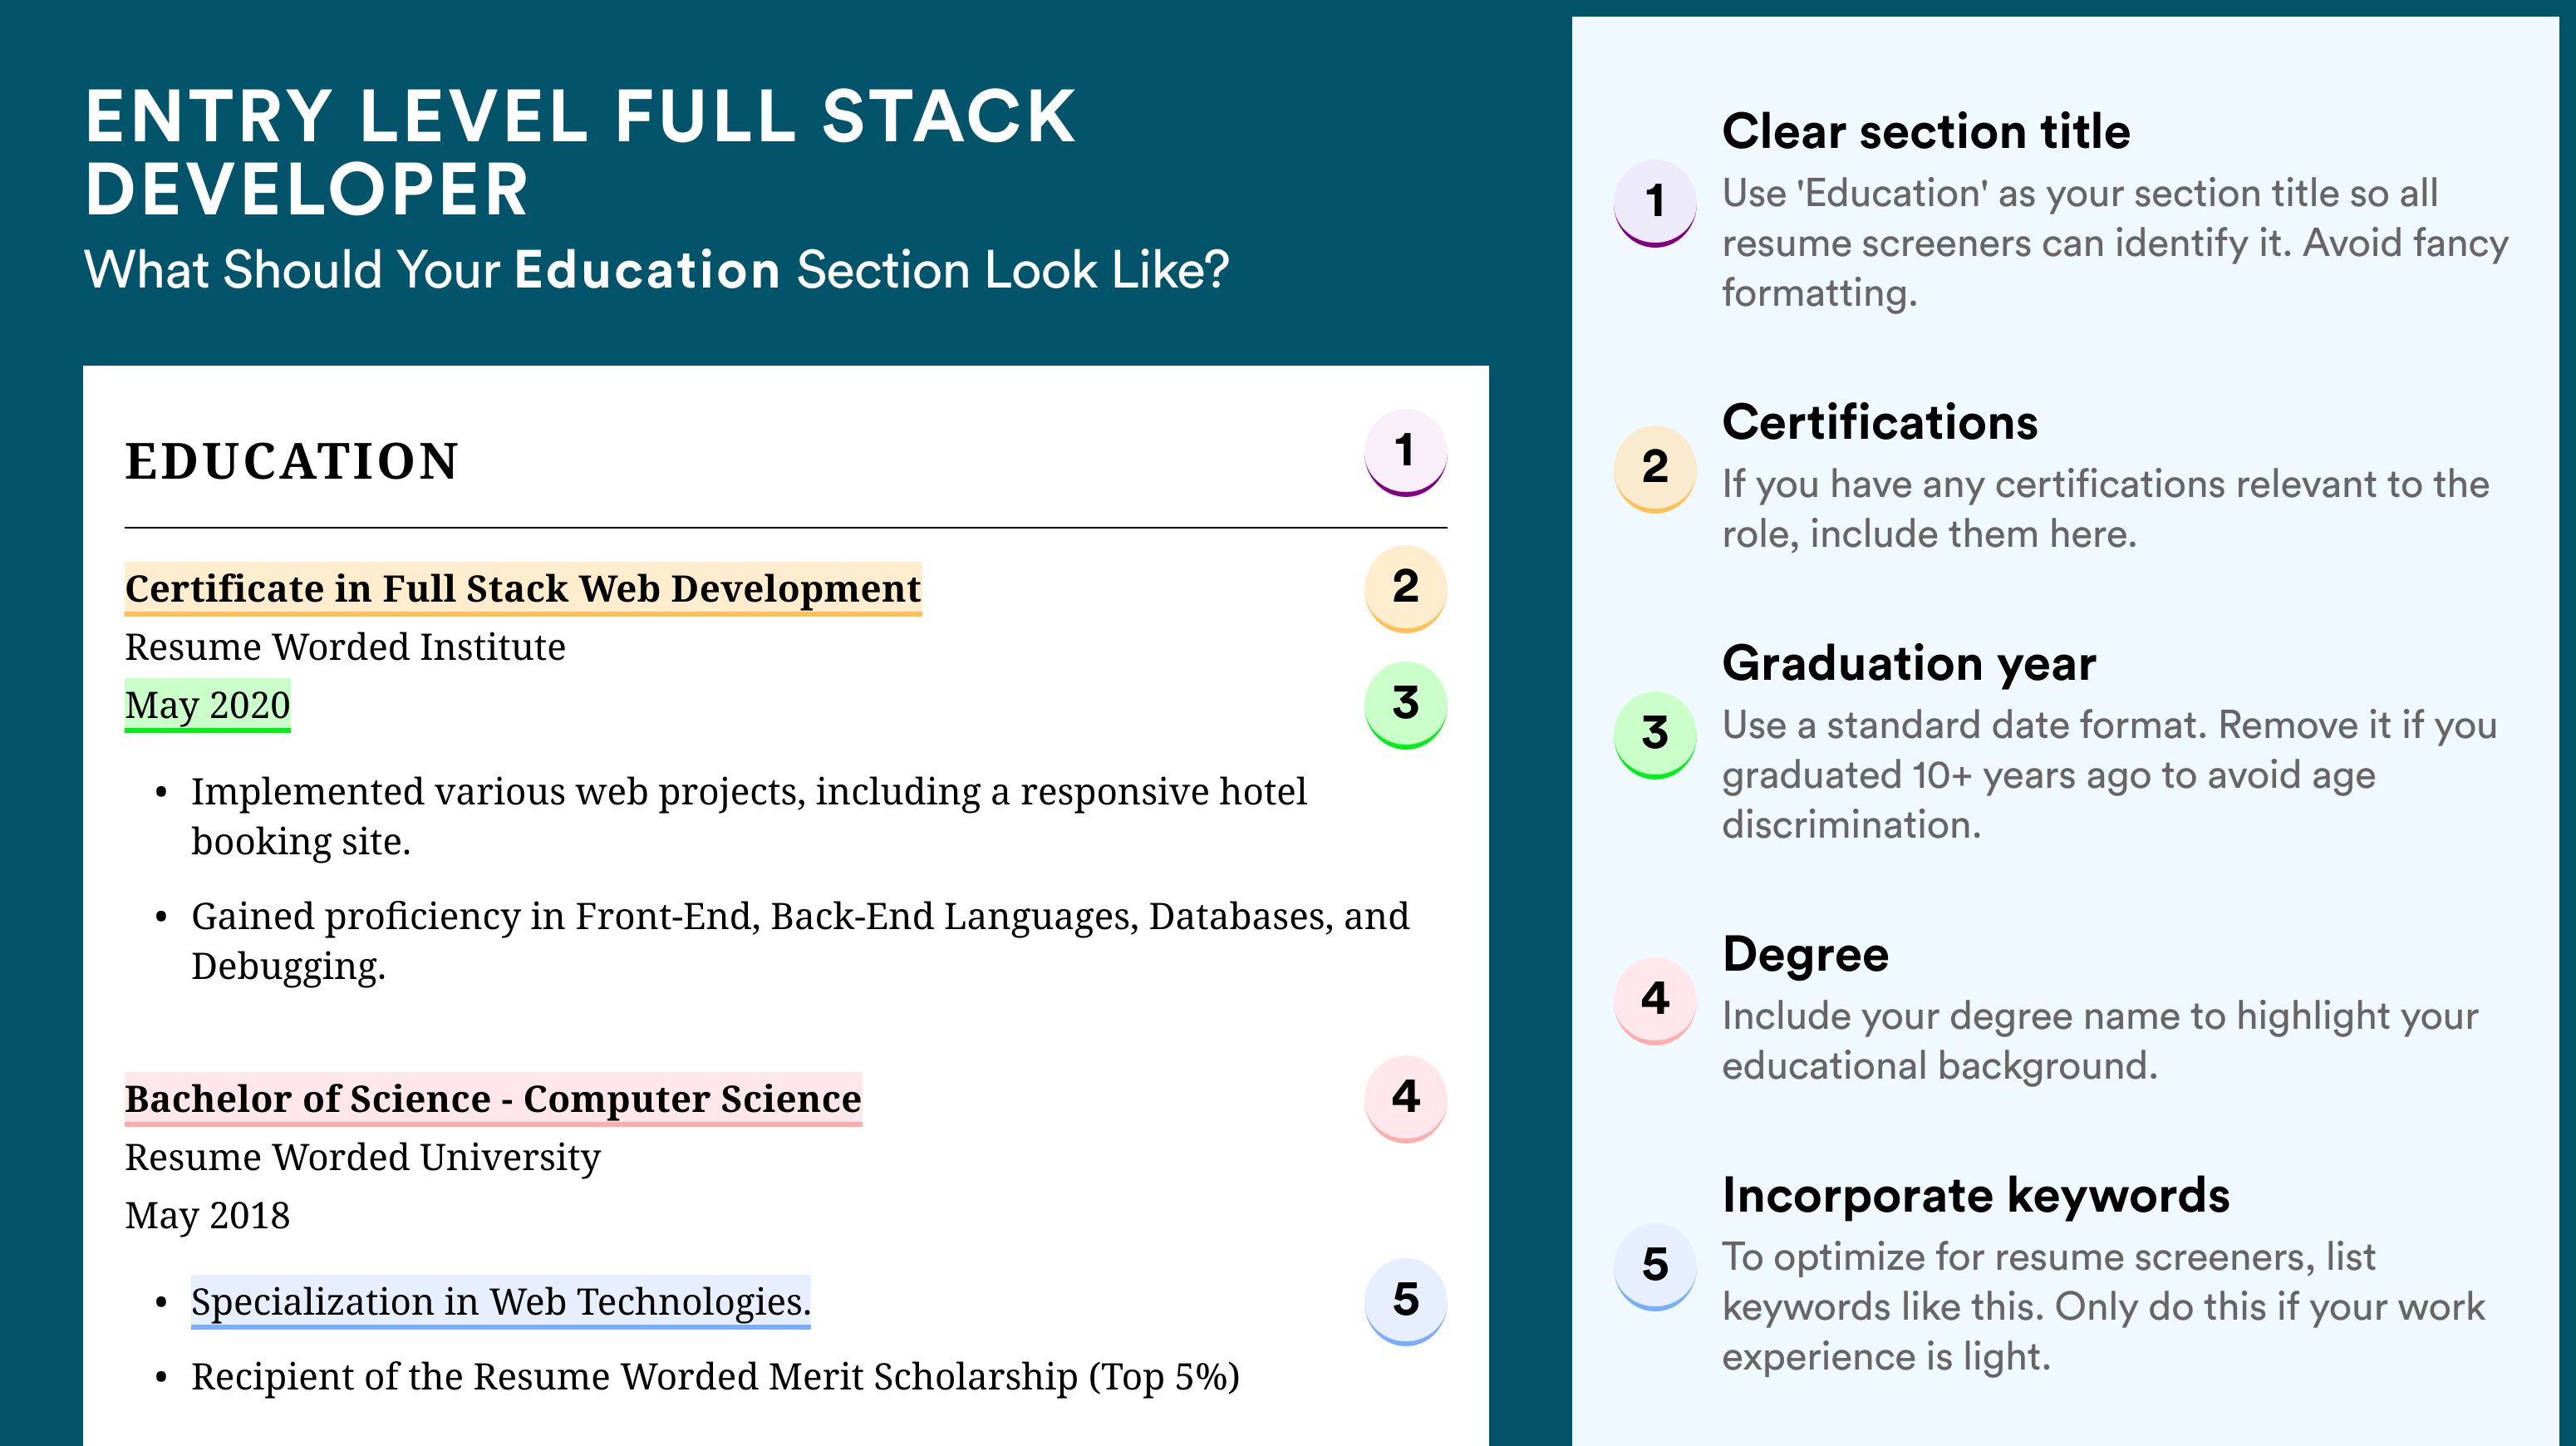 How To Write An Education Section - Entry Level Full Stack Developer Roles